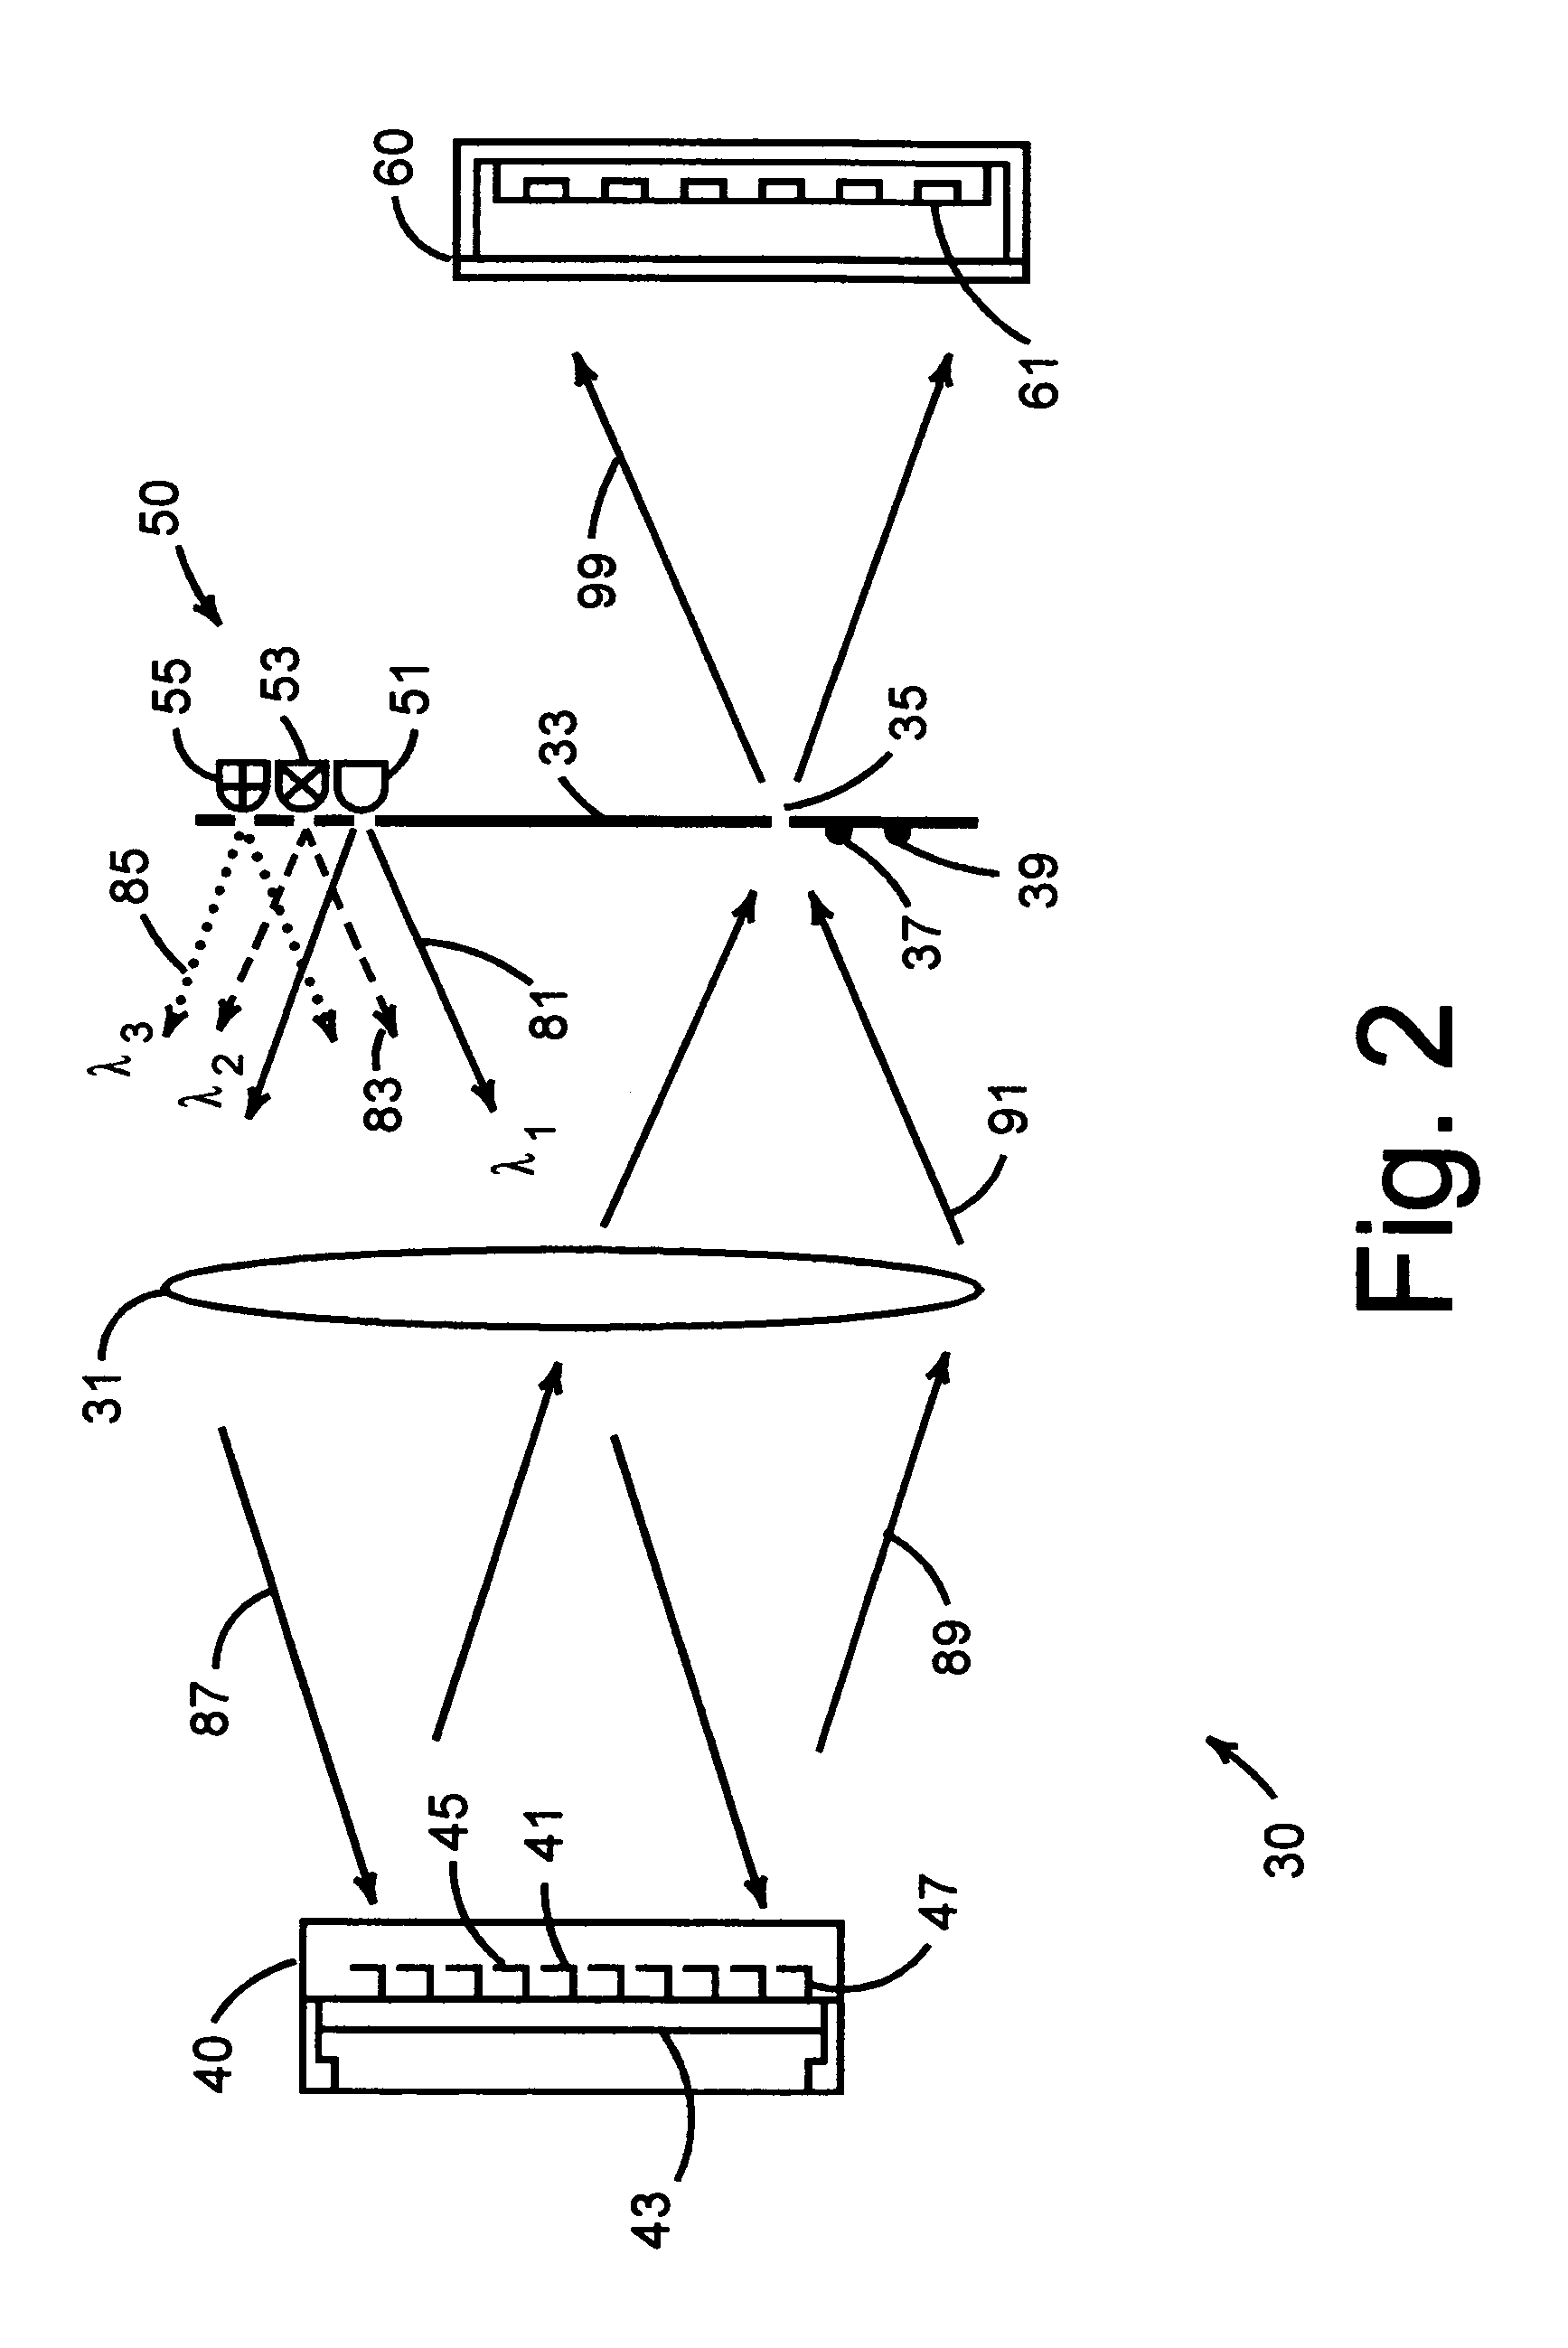 Radiation detector with extended dynamic range